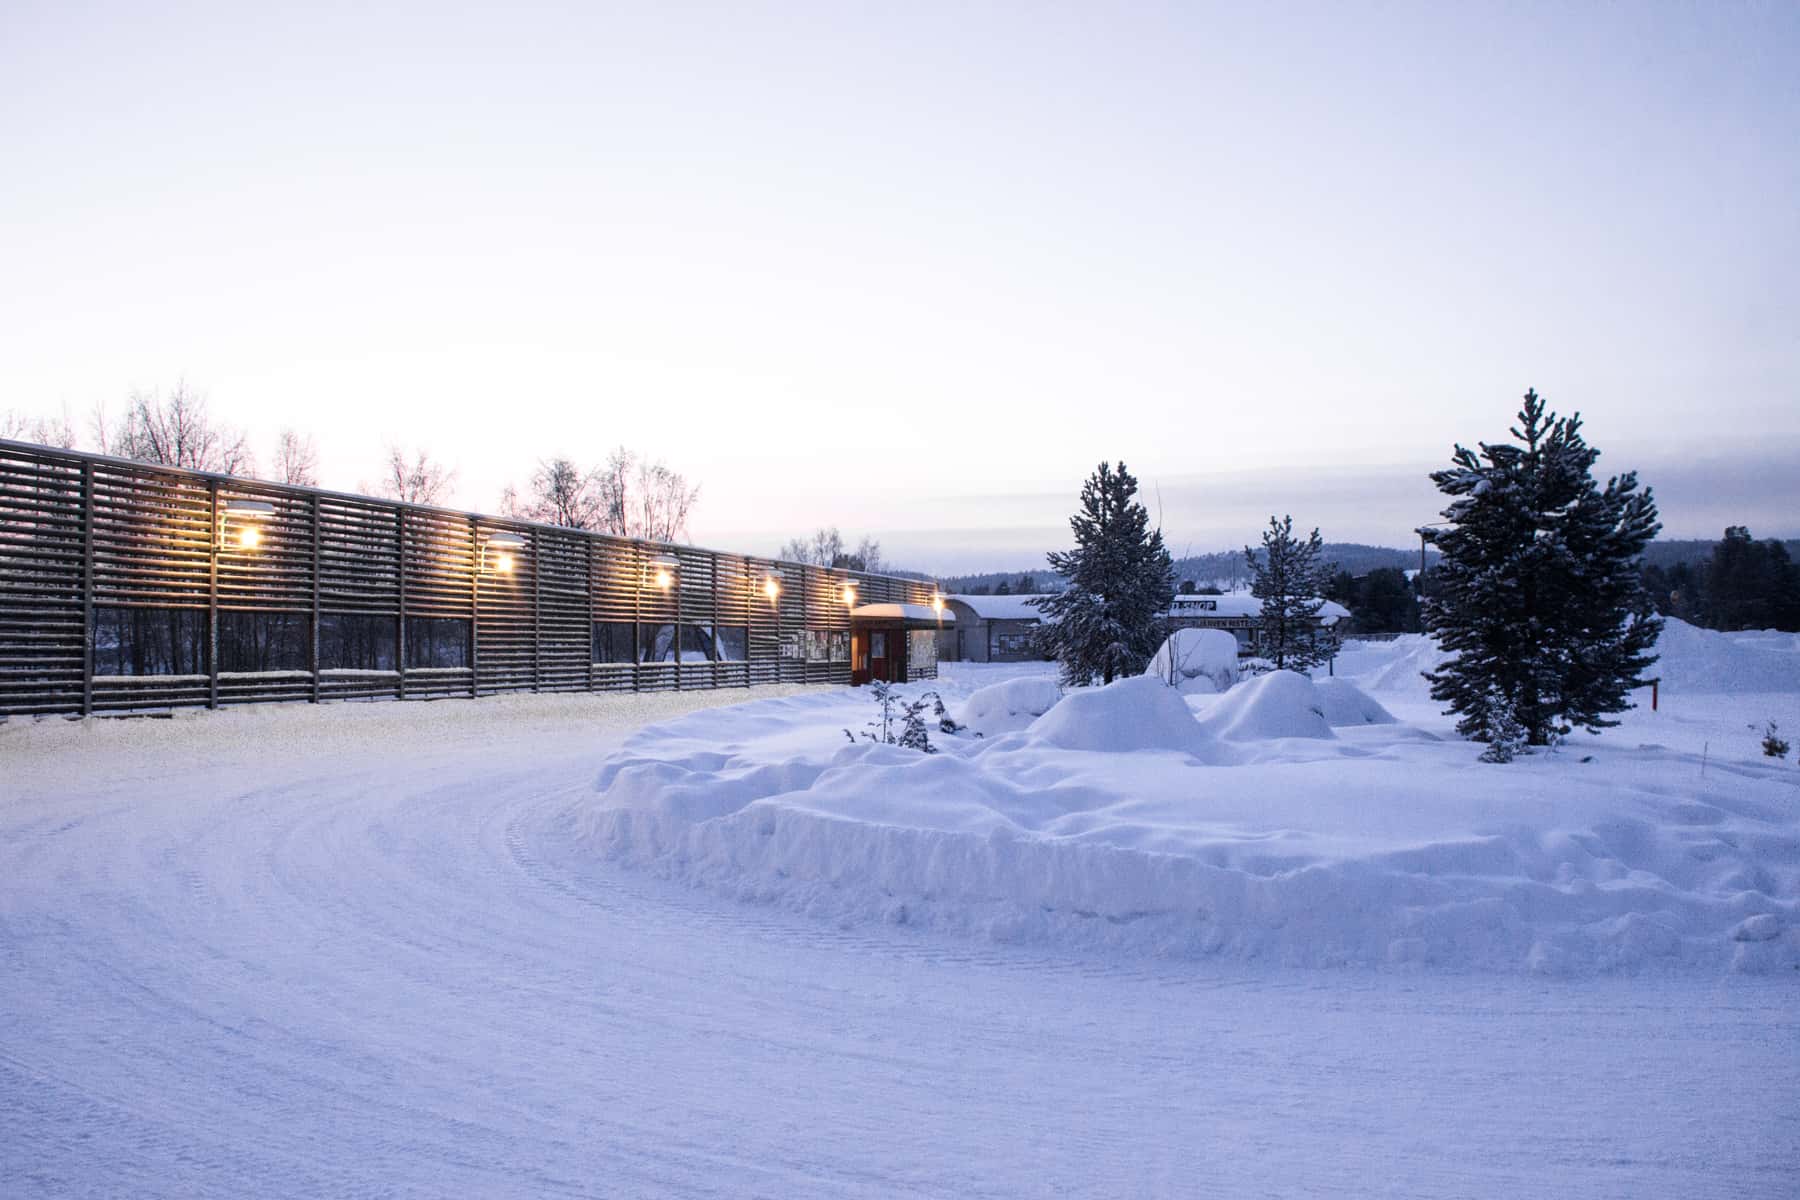 A low, long rectangular wooden building next to a snow covered curved road and a roundabout of snow.